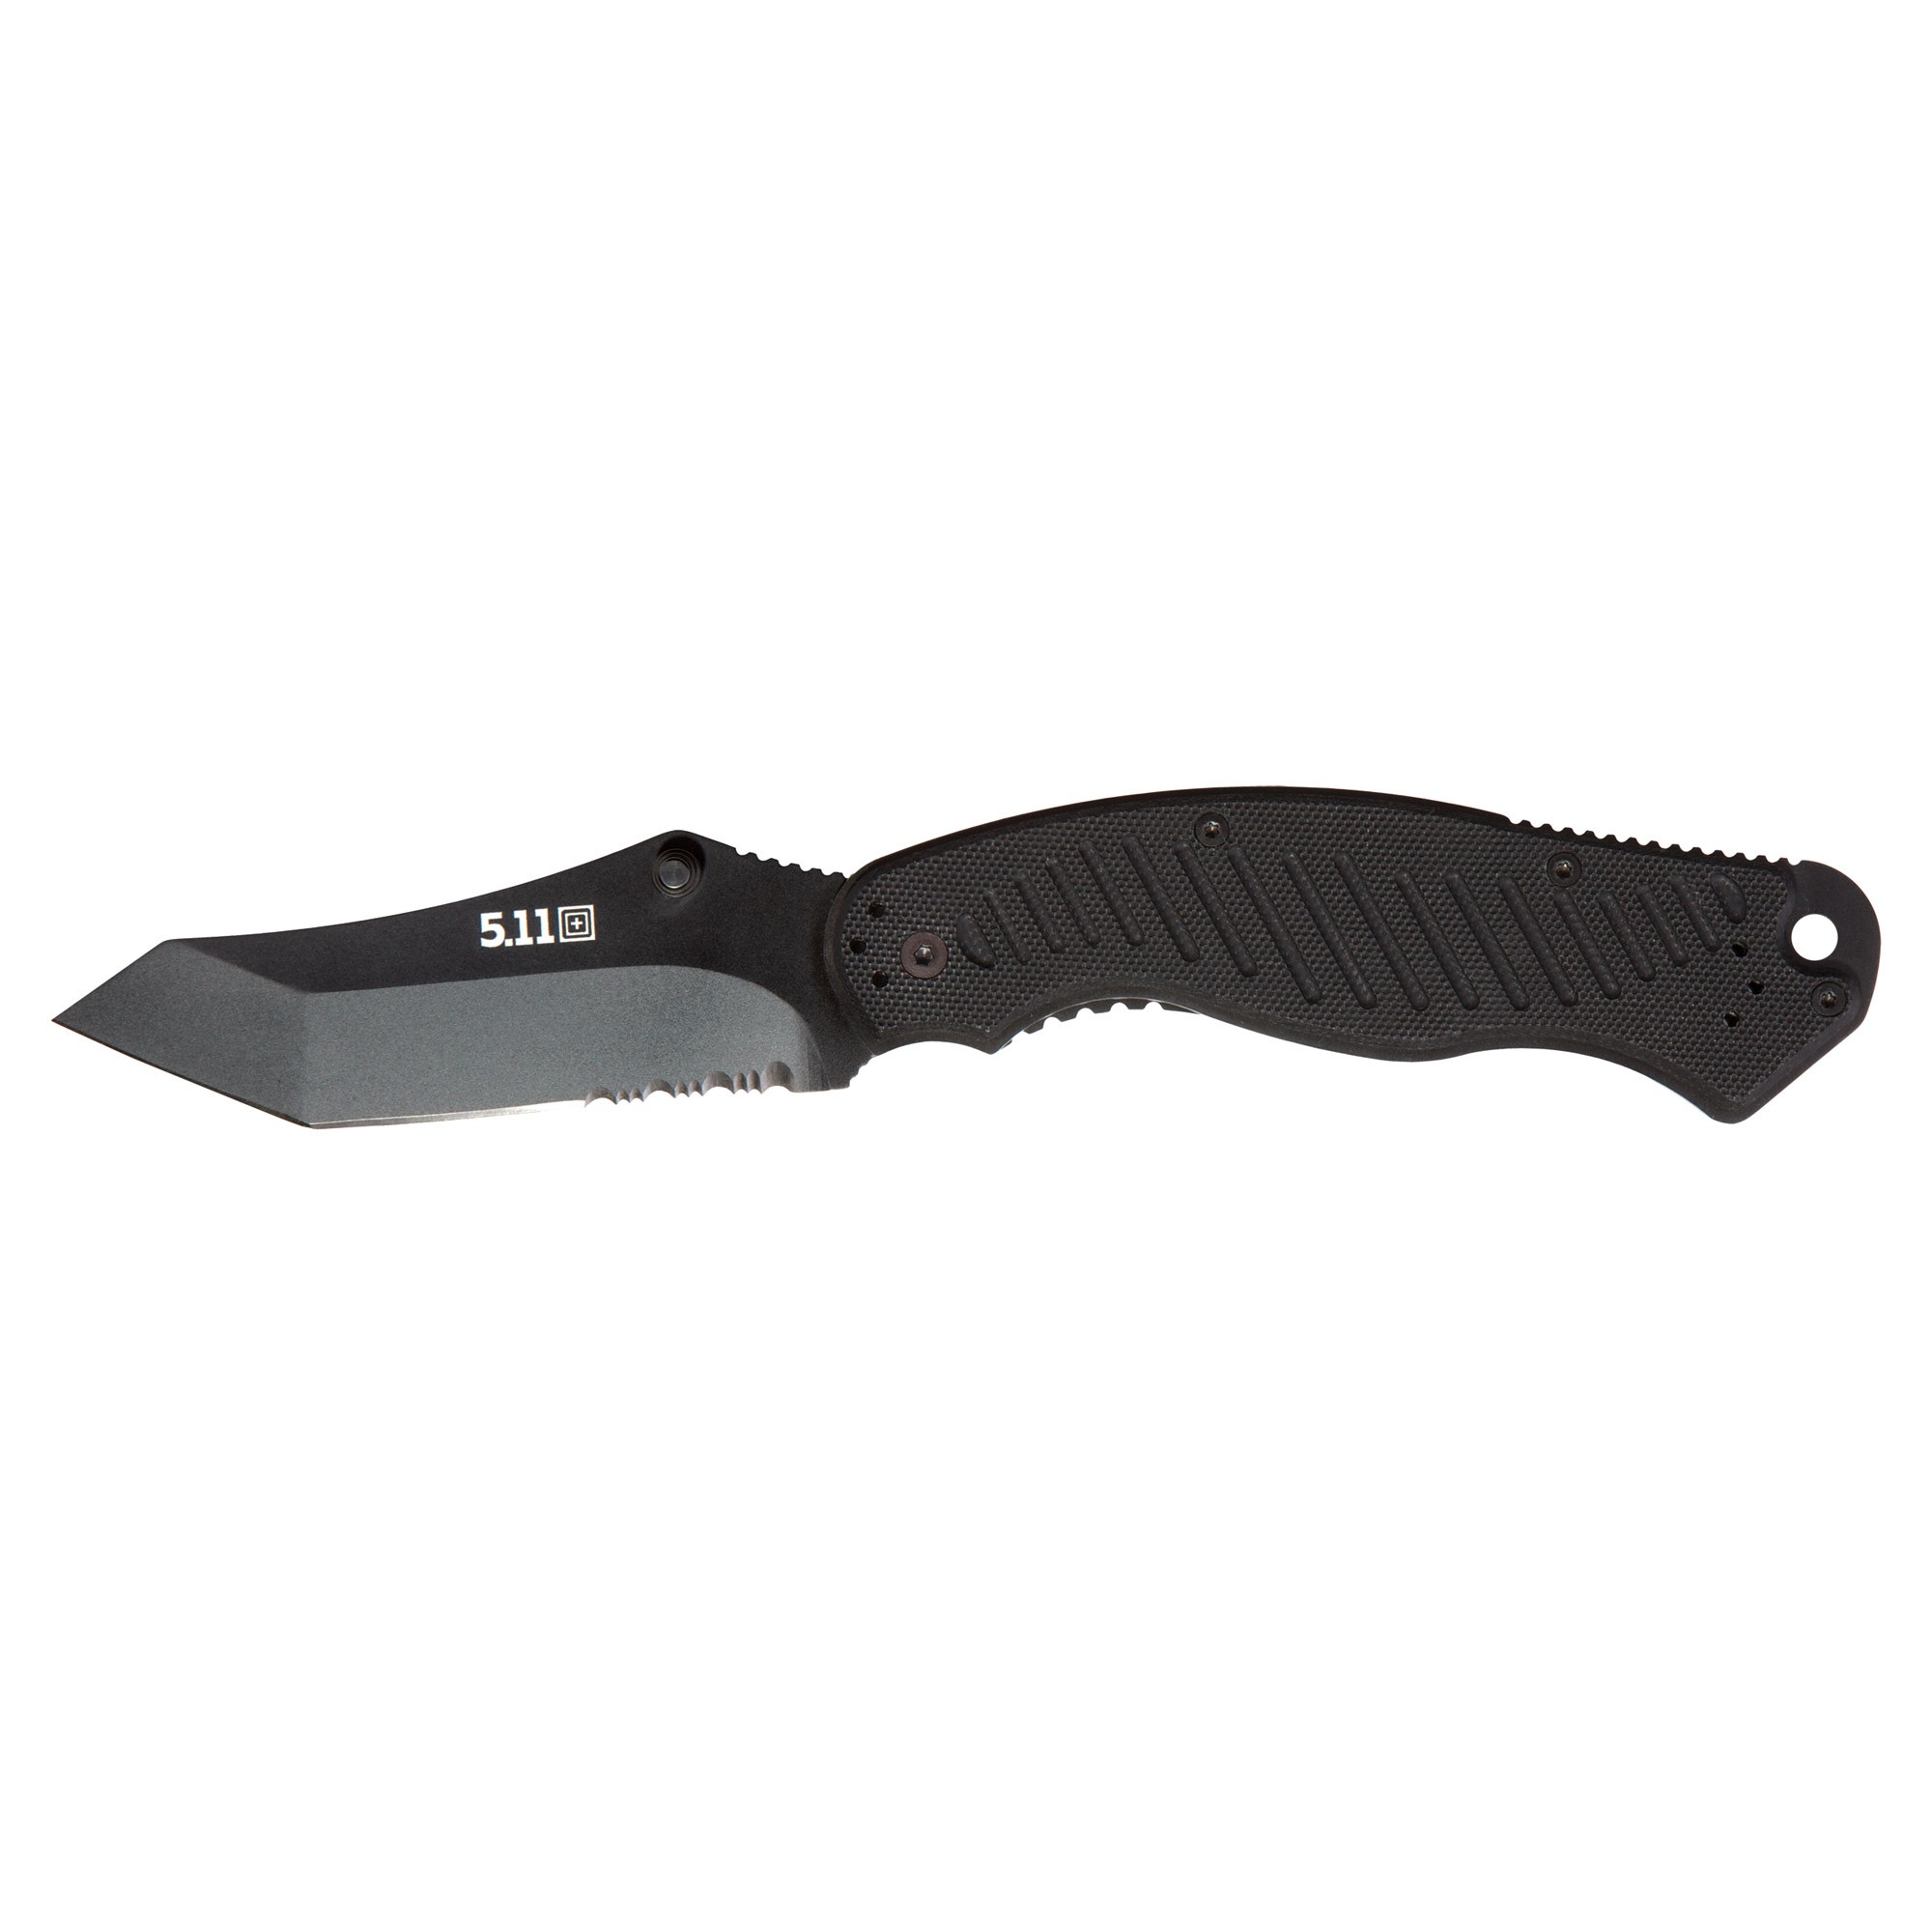 5.11 Tactical ARK Tanto 51069